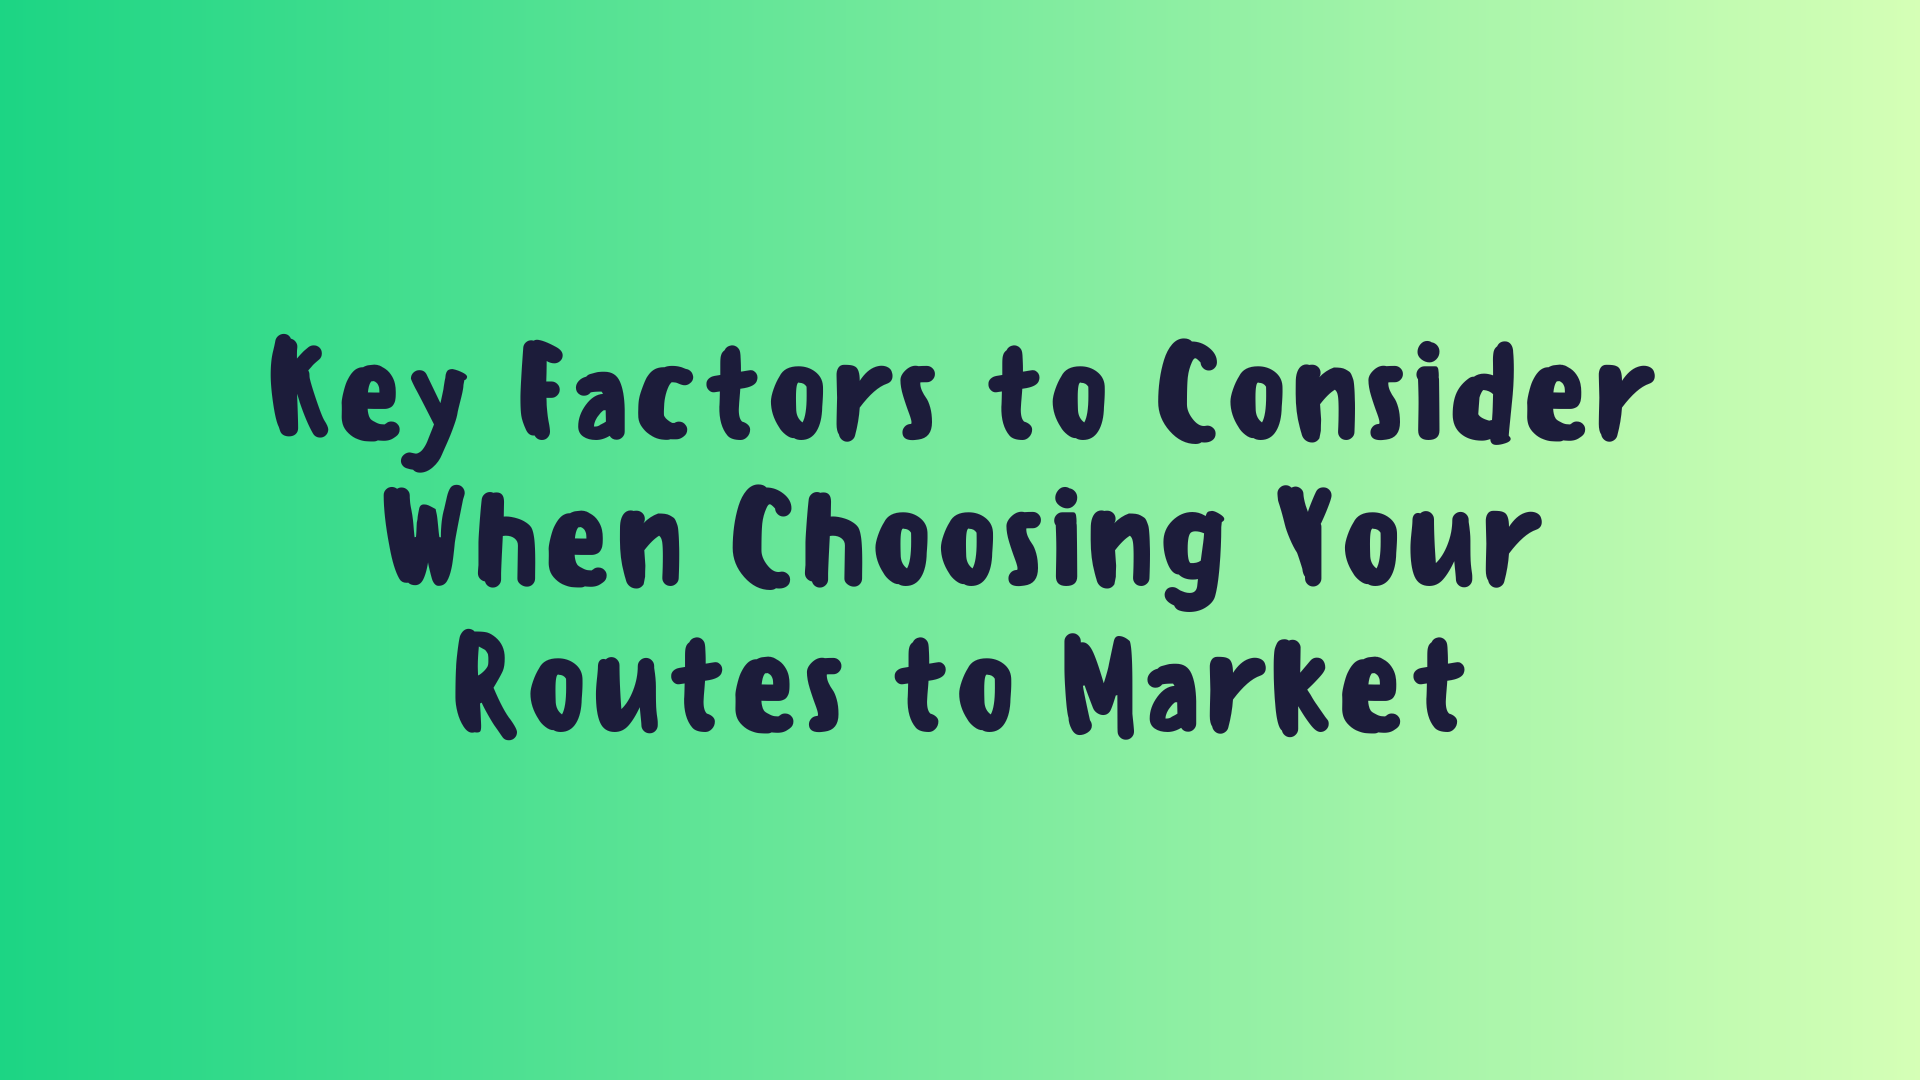 Key Factors to Consider When Choosing Your Routes to Market